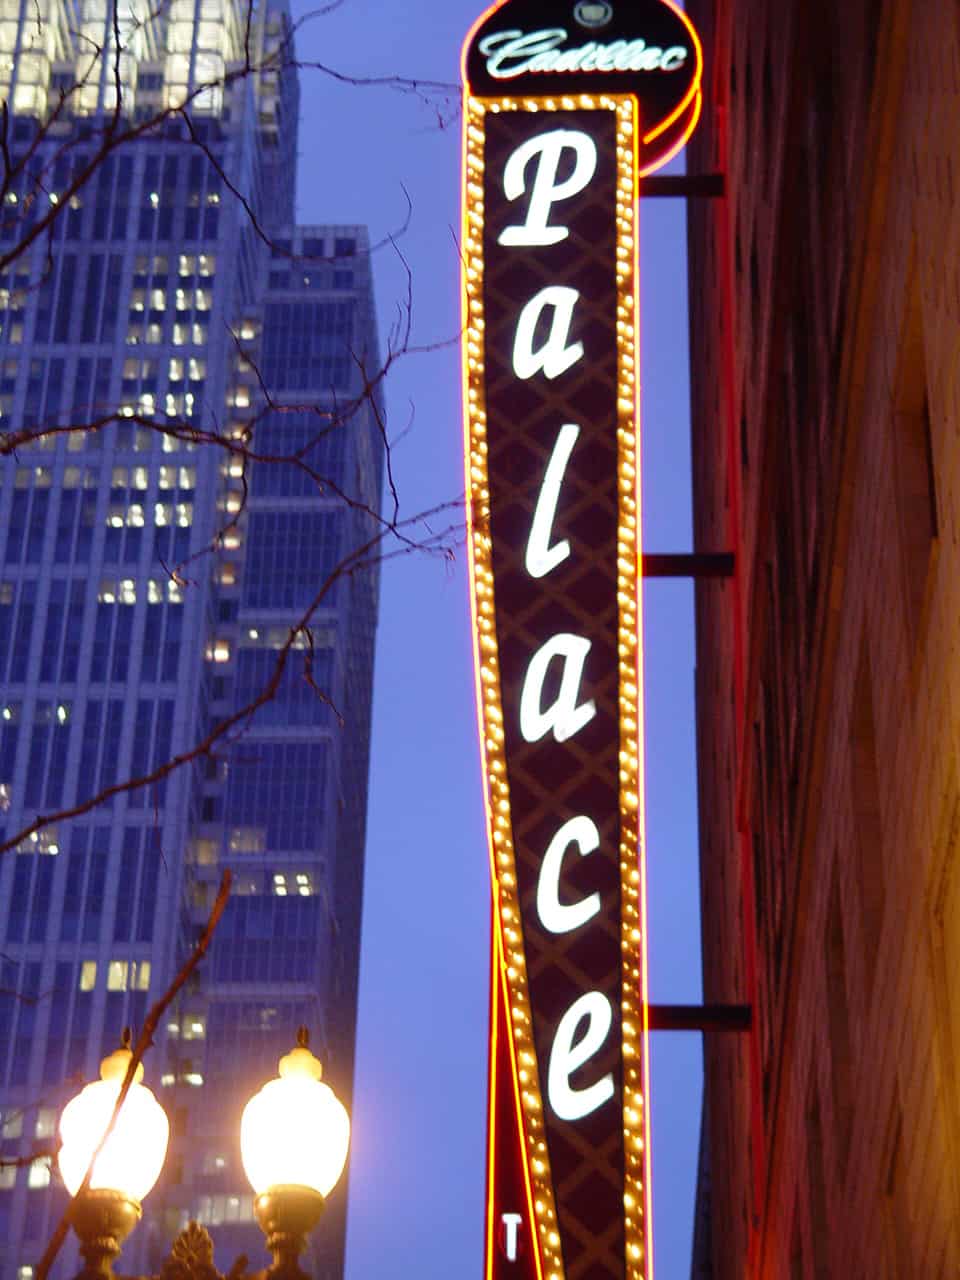 Palace Theatre in Chicago